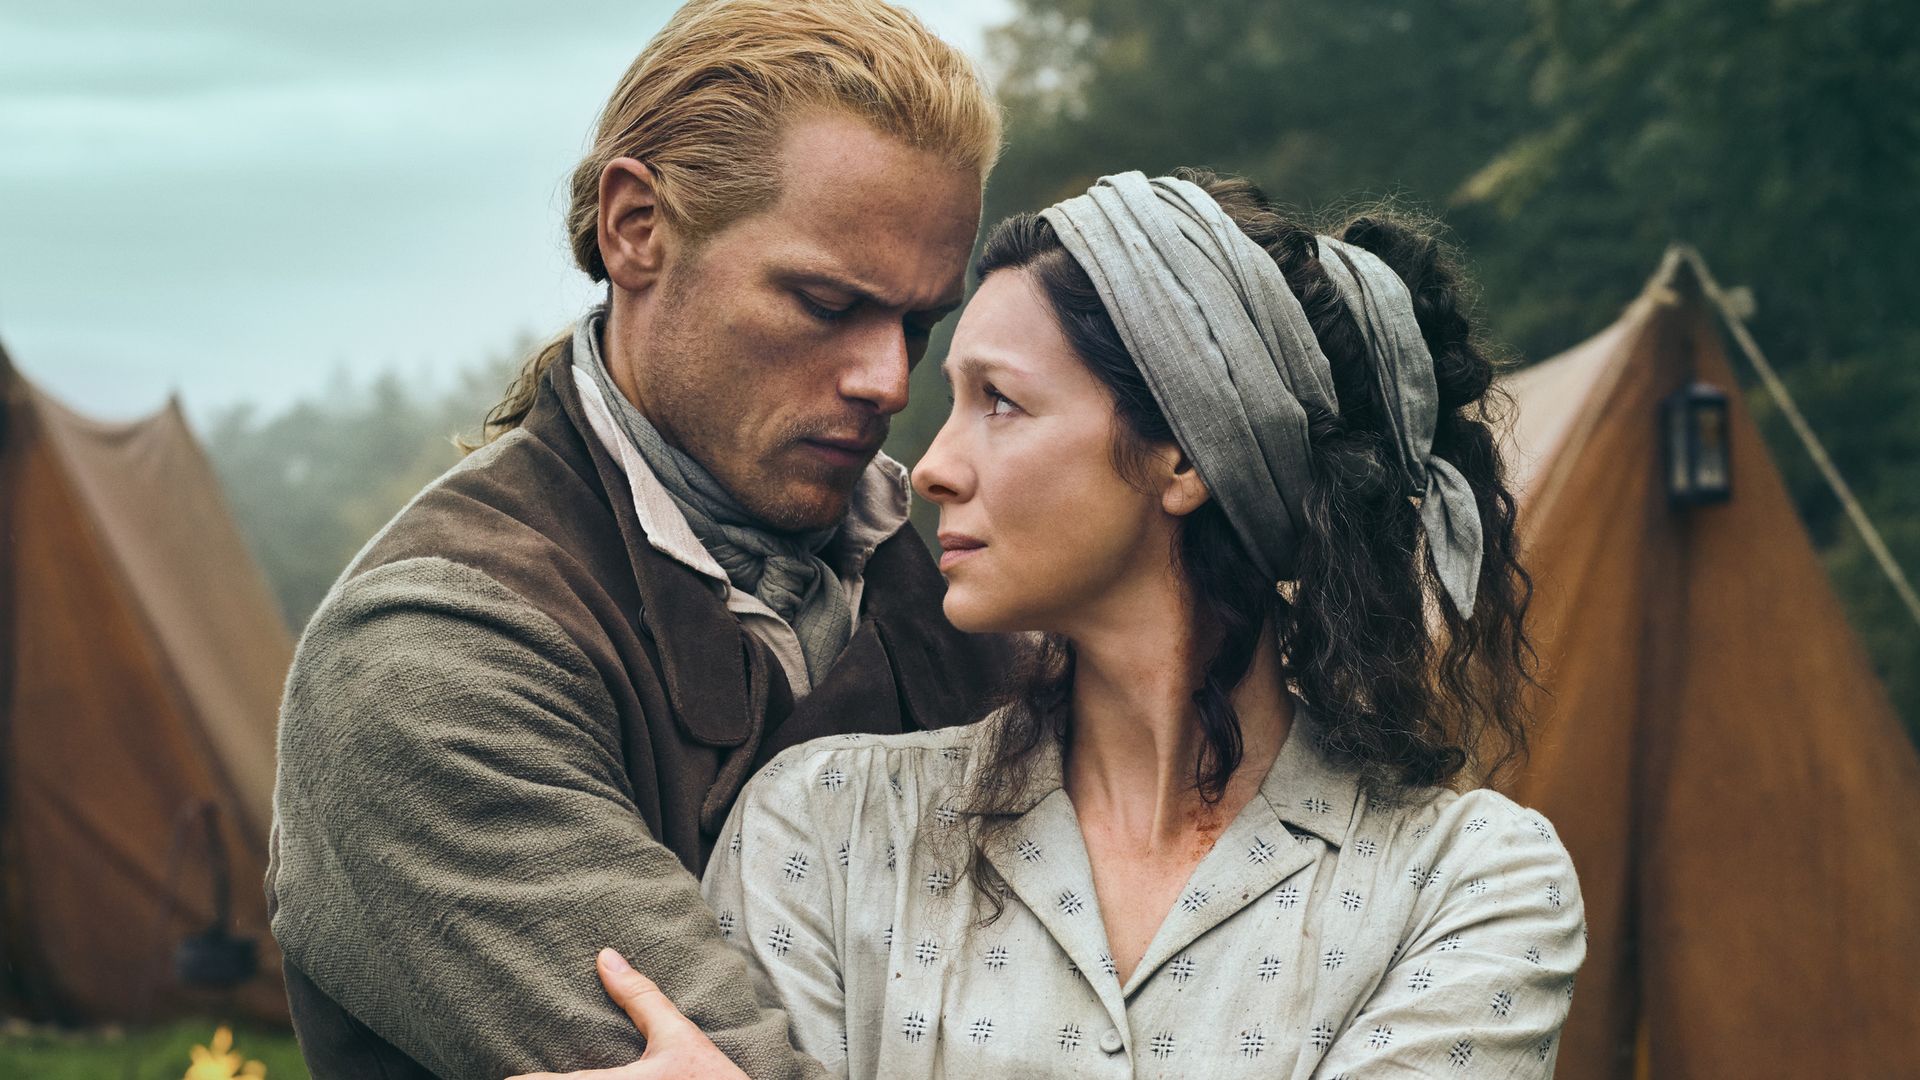 Outlander S Sam Heughan And Caitriona Balfe Beam In Sweet New Behind The Scenes Photo See Here